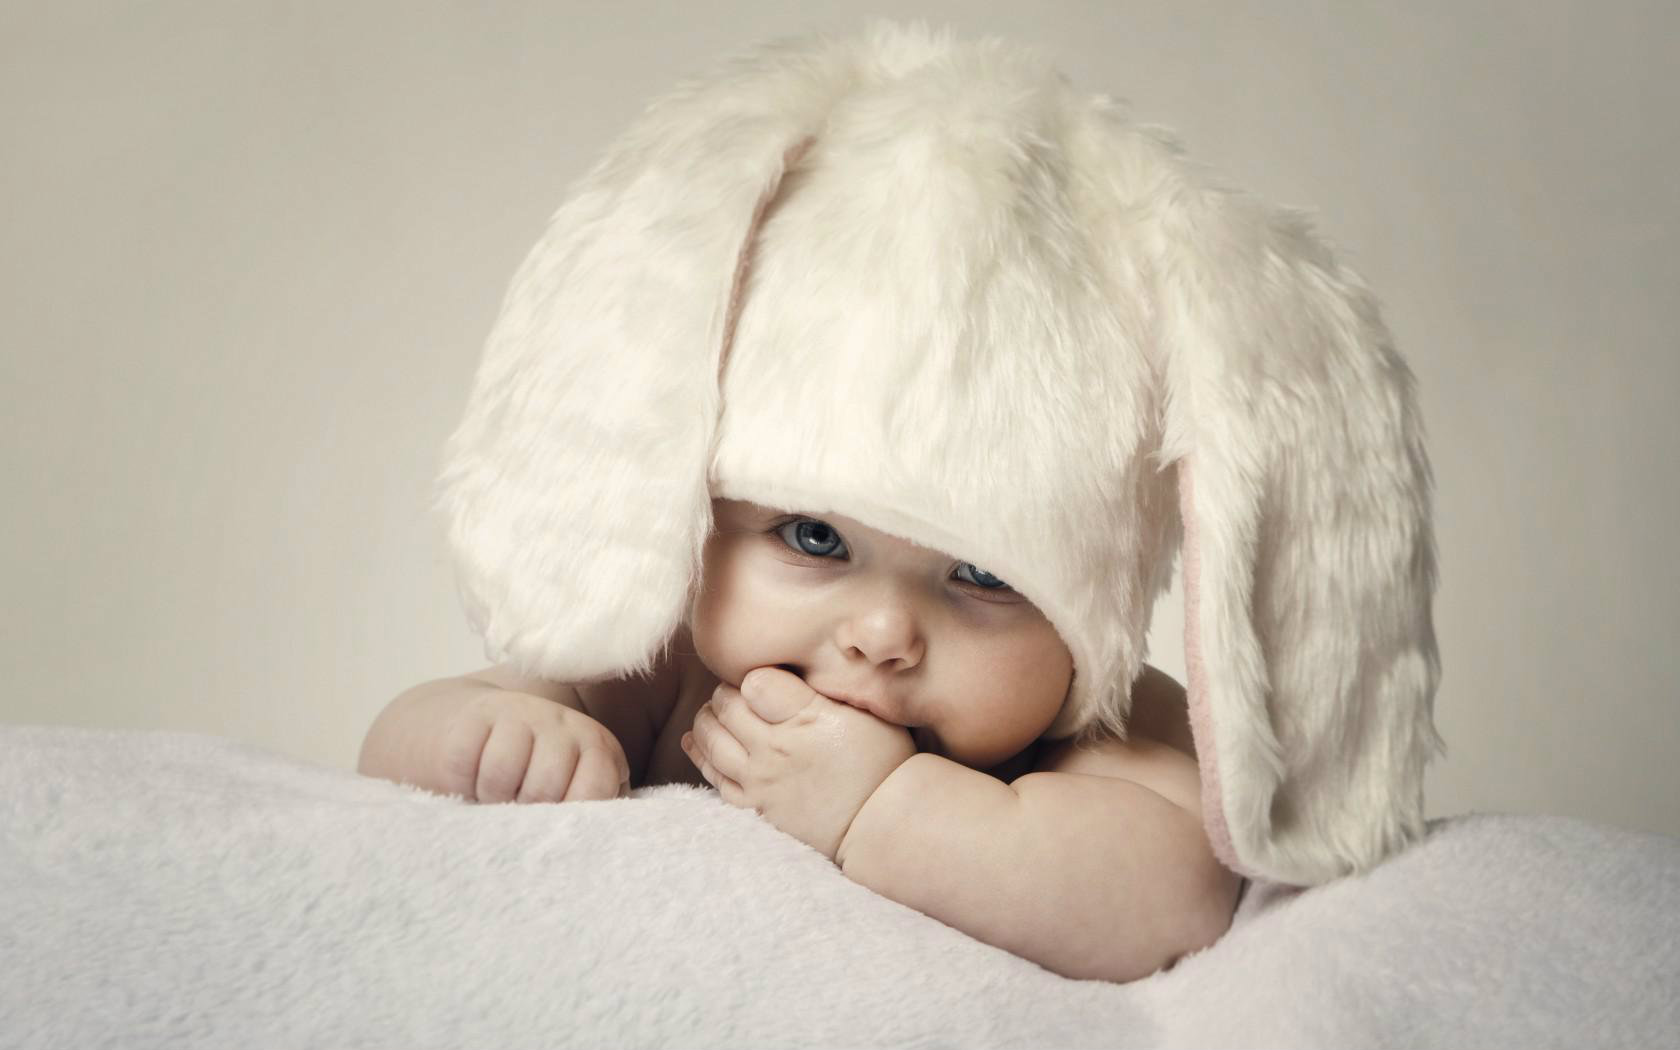 Cute Baby Boy Wallpapers For Desktop Baby Wall - Baby With Bunny Ears - HD Wallpaper 